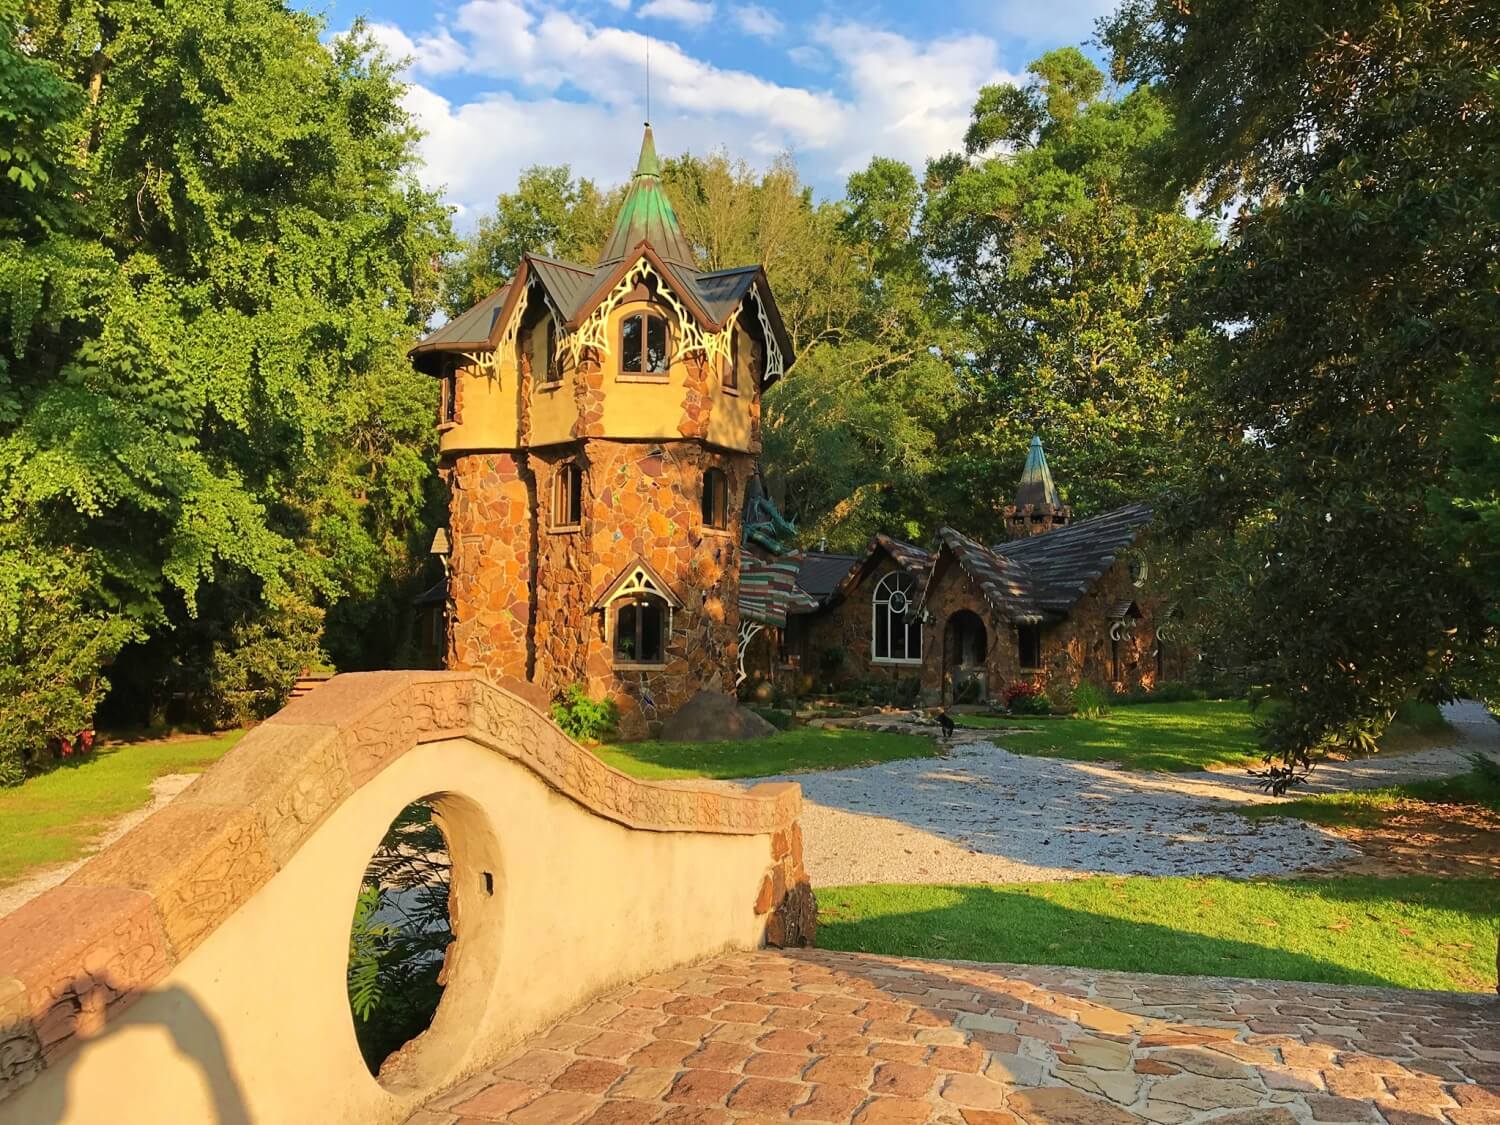 The Mosher's Storybook Castle in Fairhope